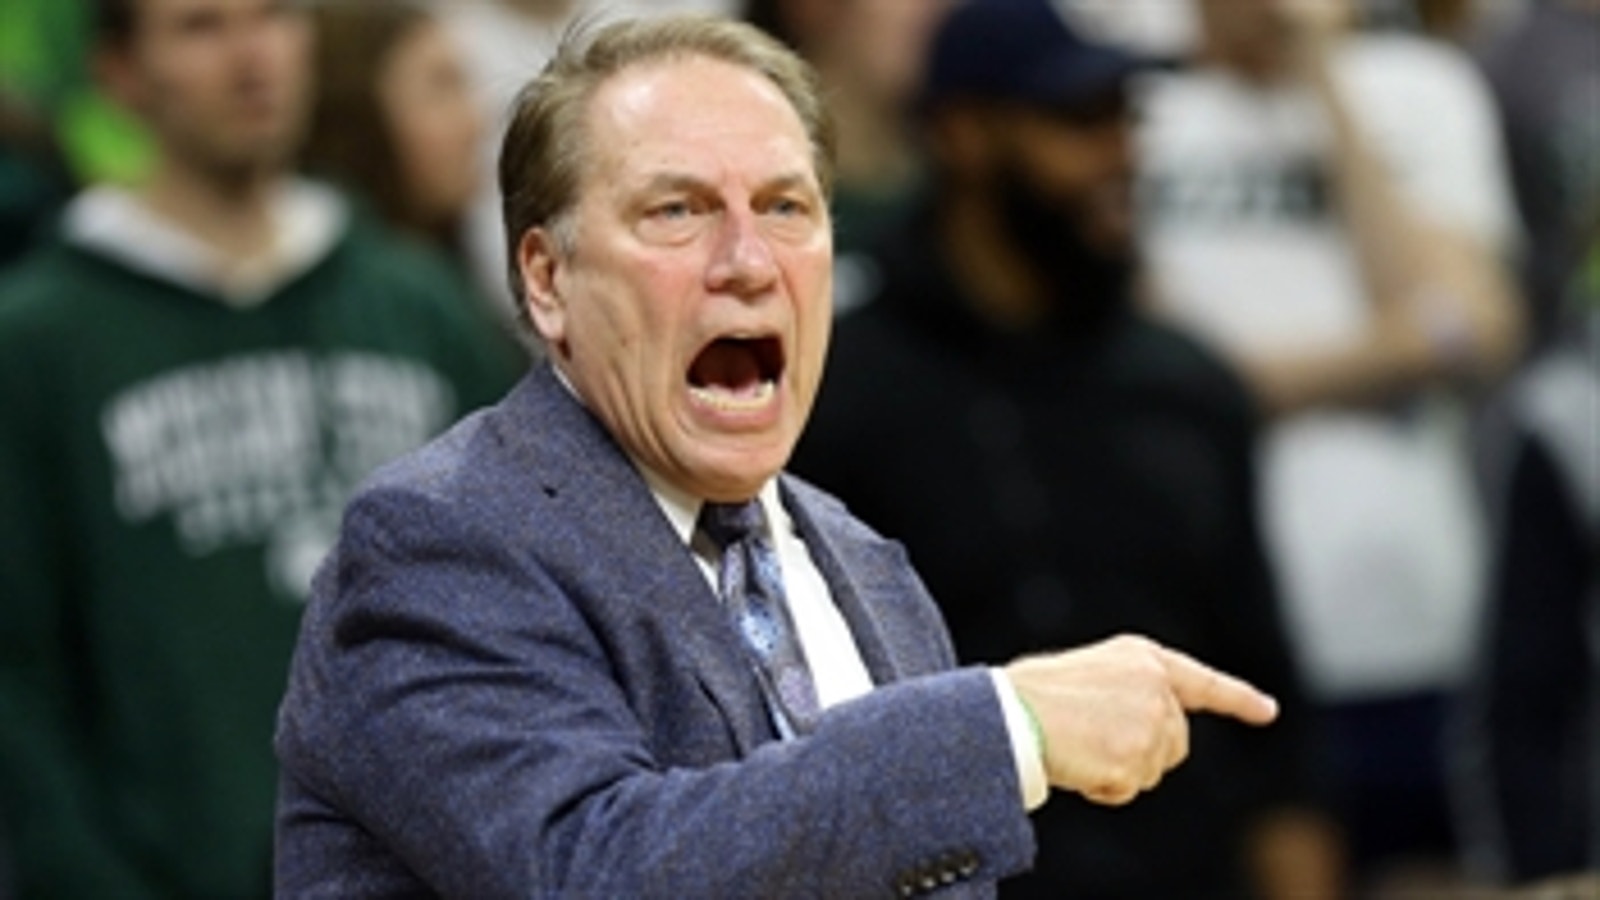 Tom Izzo discusses the role of parity and social media